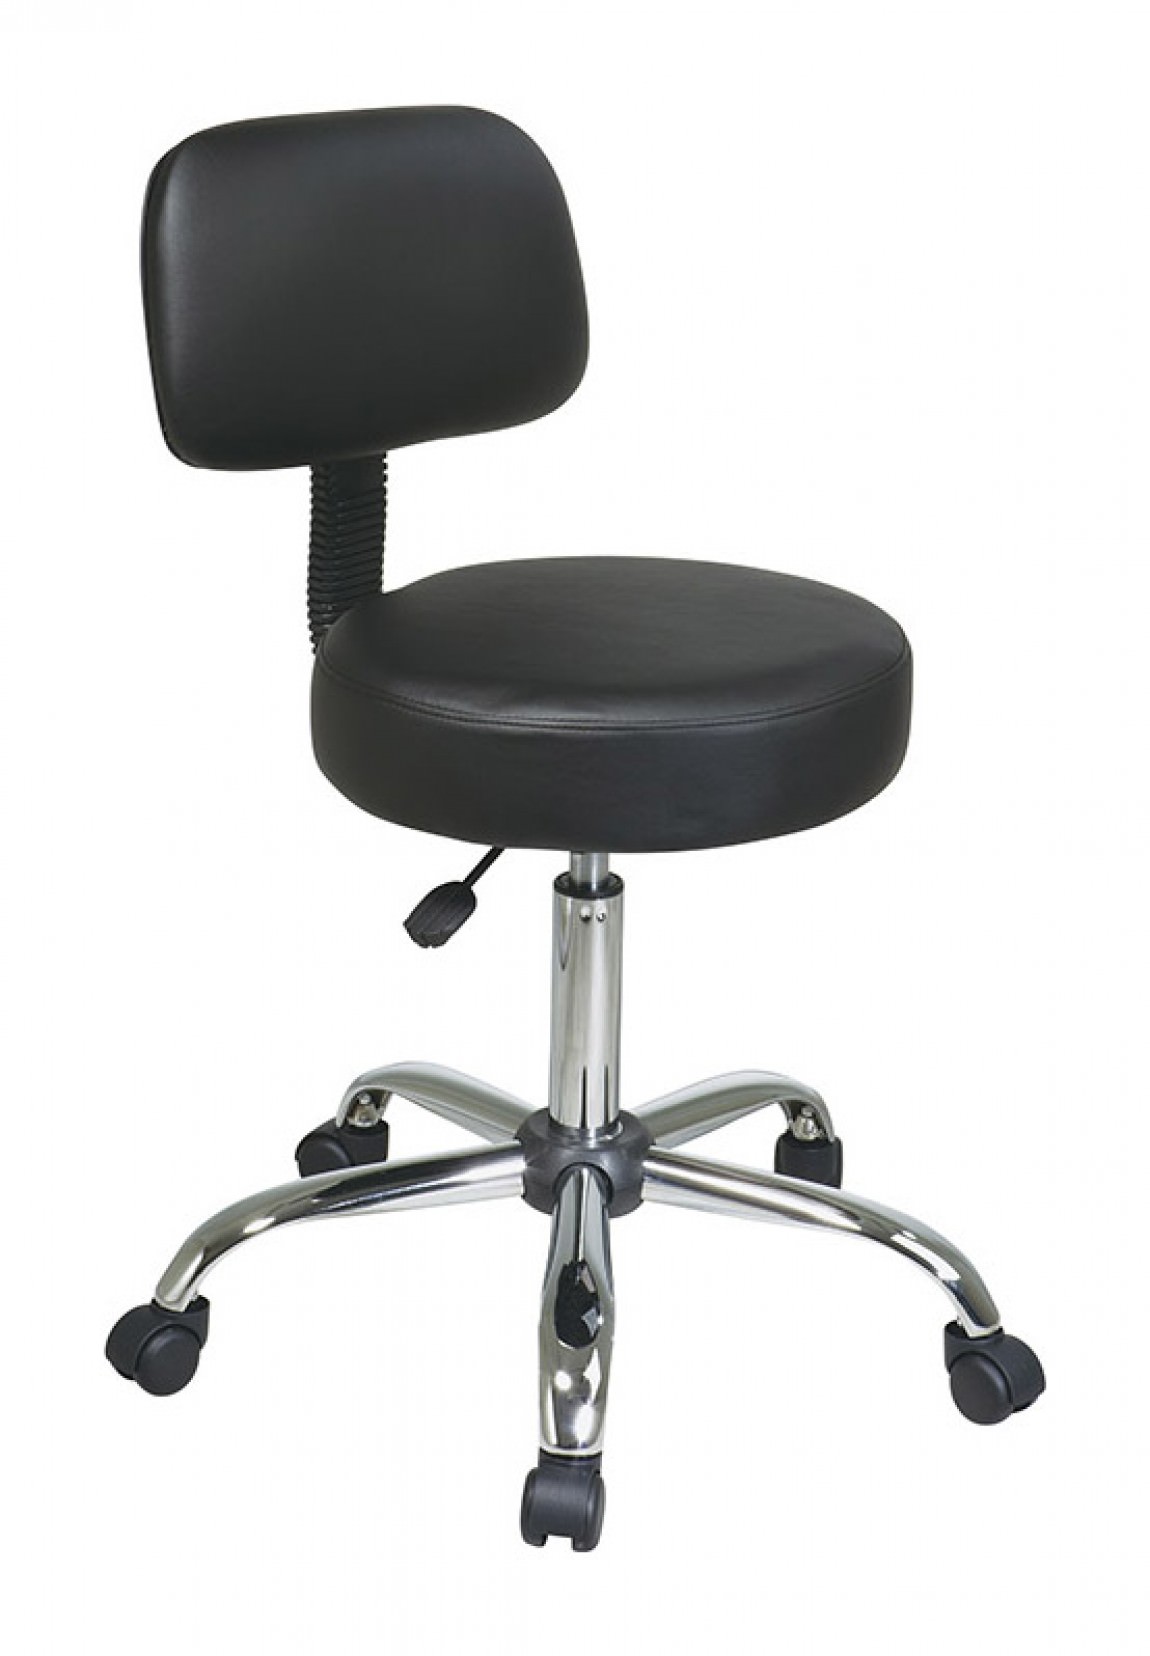 Black Rolling Stool Chair 25.5 x 21.5 x 32.75-37.75 : ST235V-3 - Work  Smart by Office Star Products